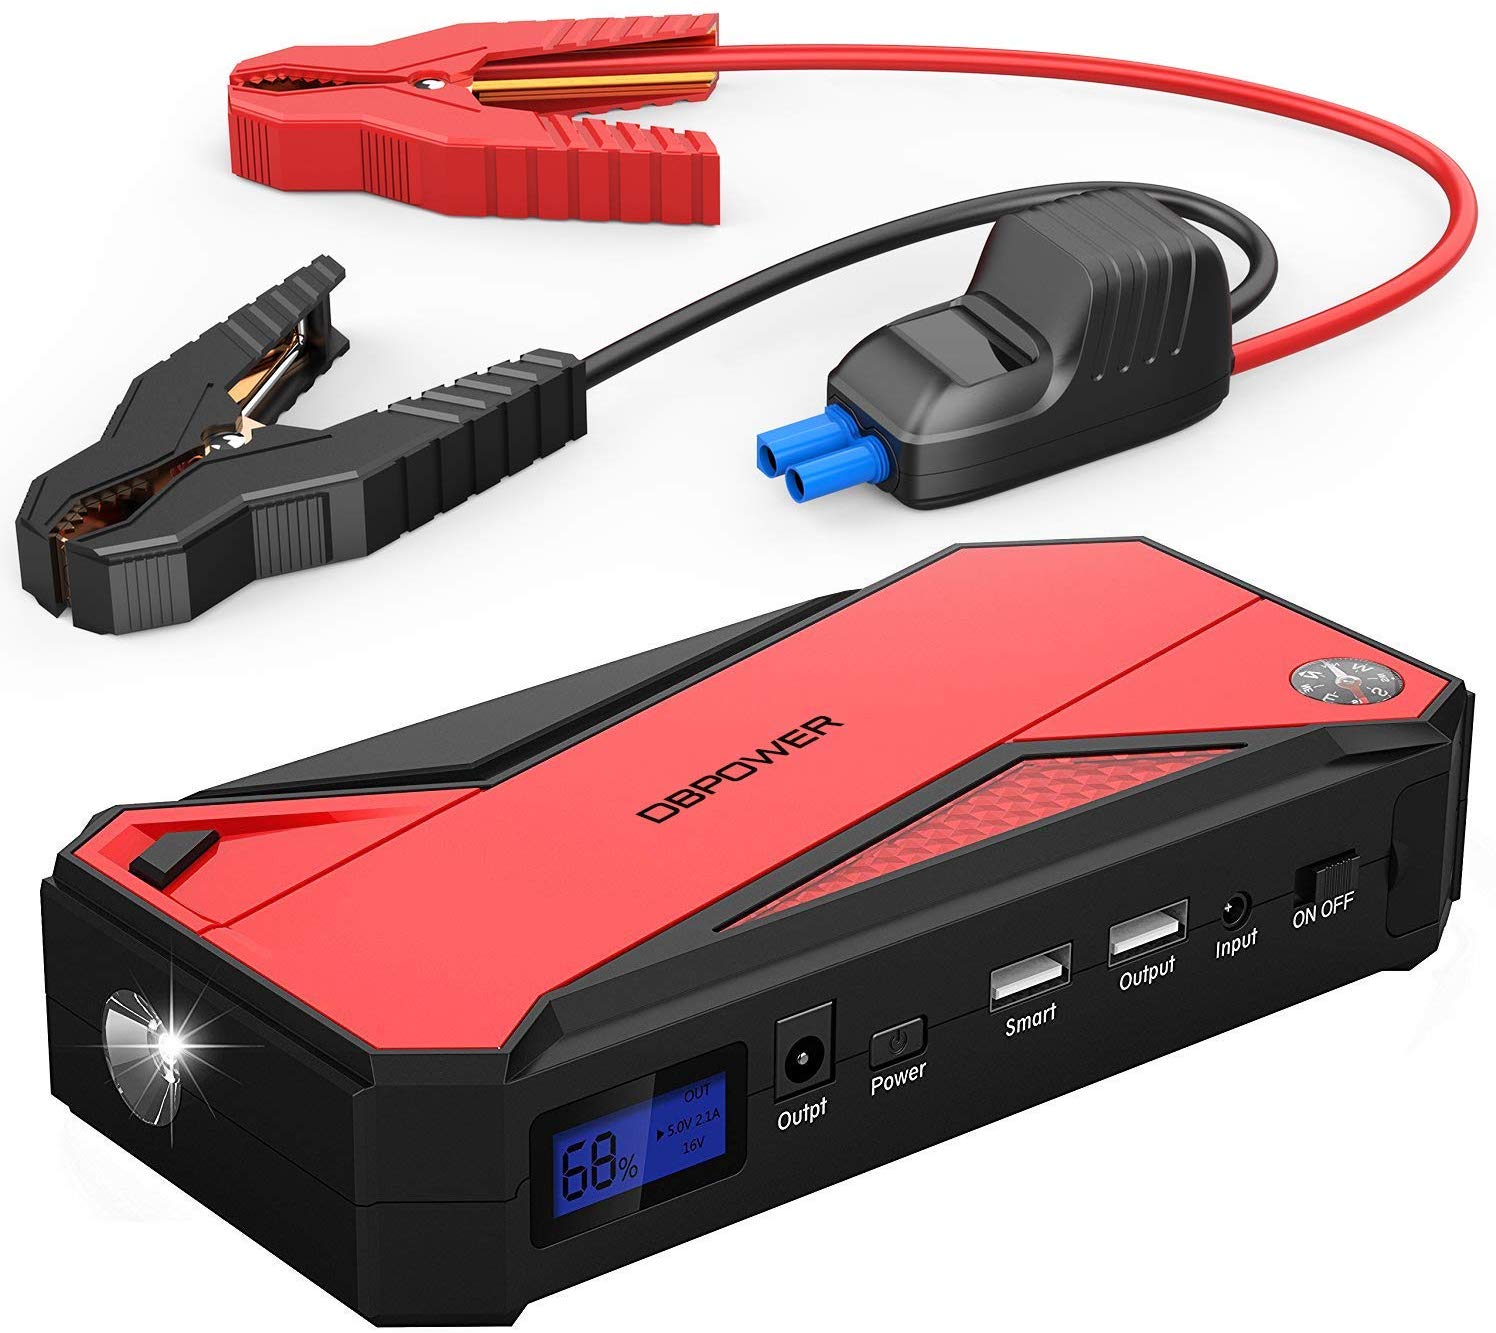 The PowerAll Portable Power Bank and Car Jump Starter